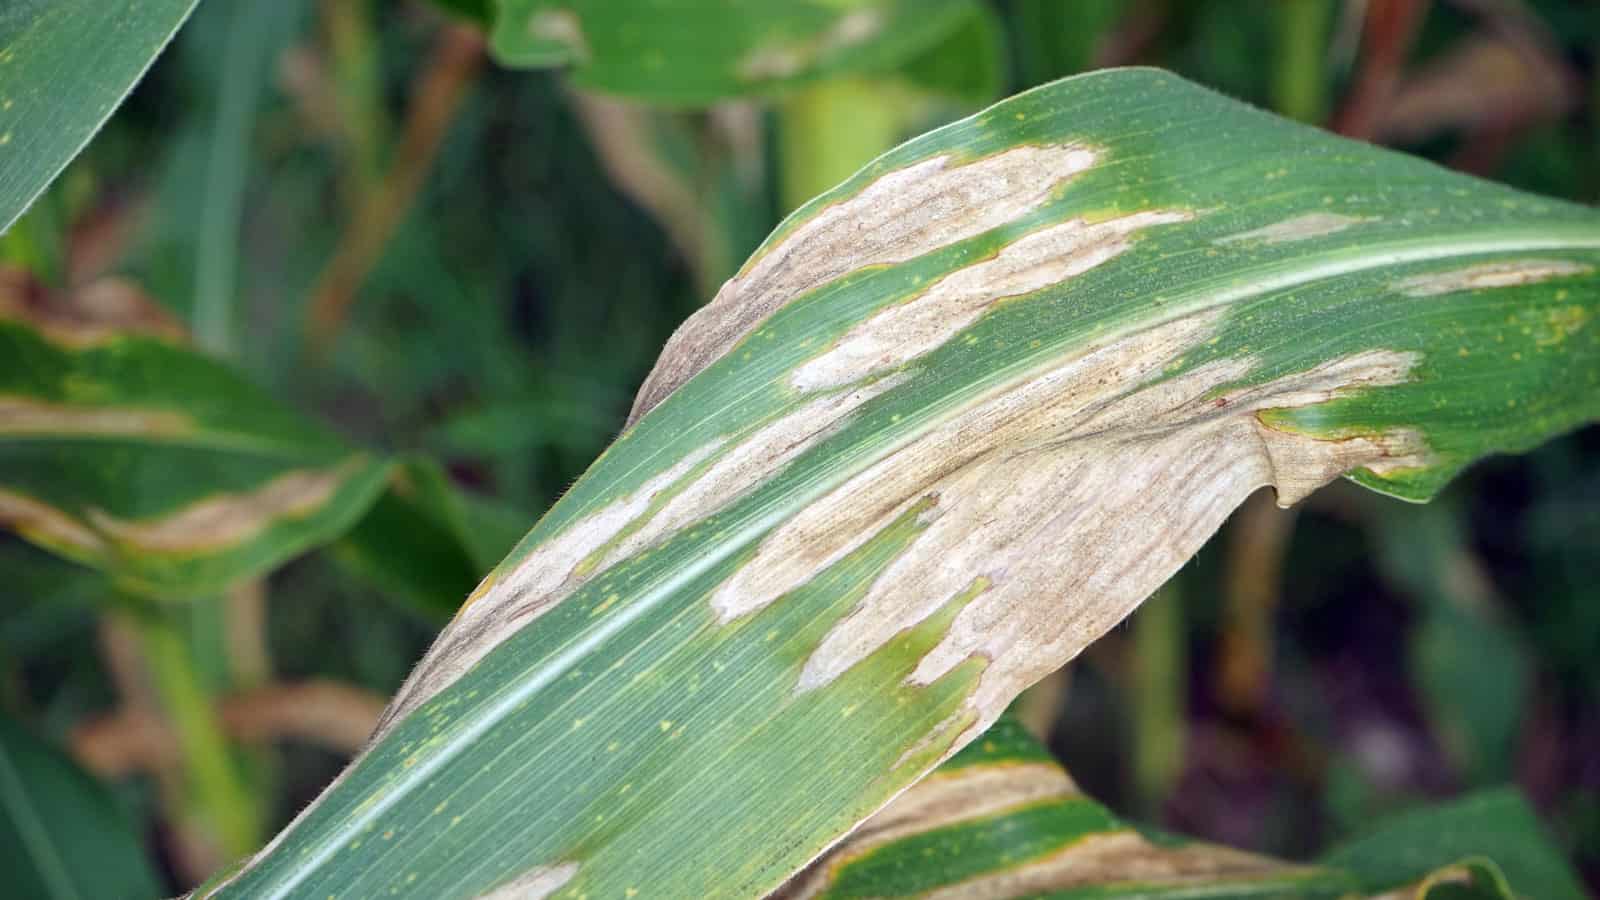 A palm tree infected with leaf blight